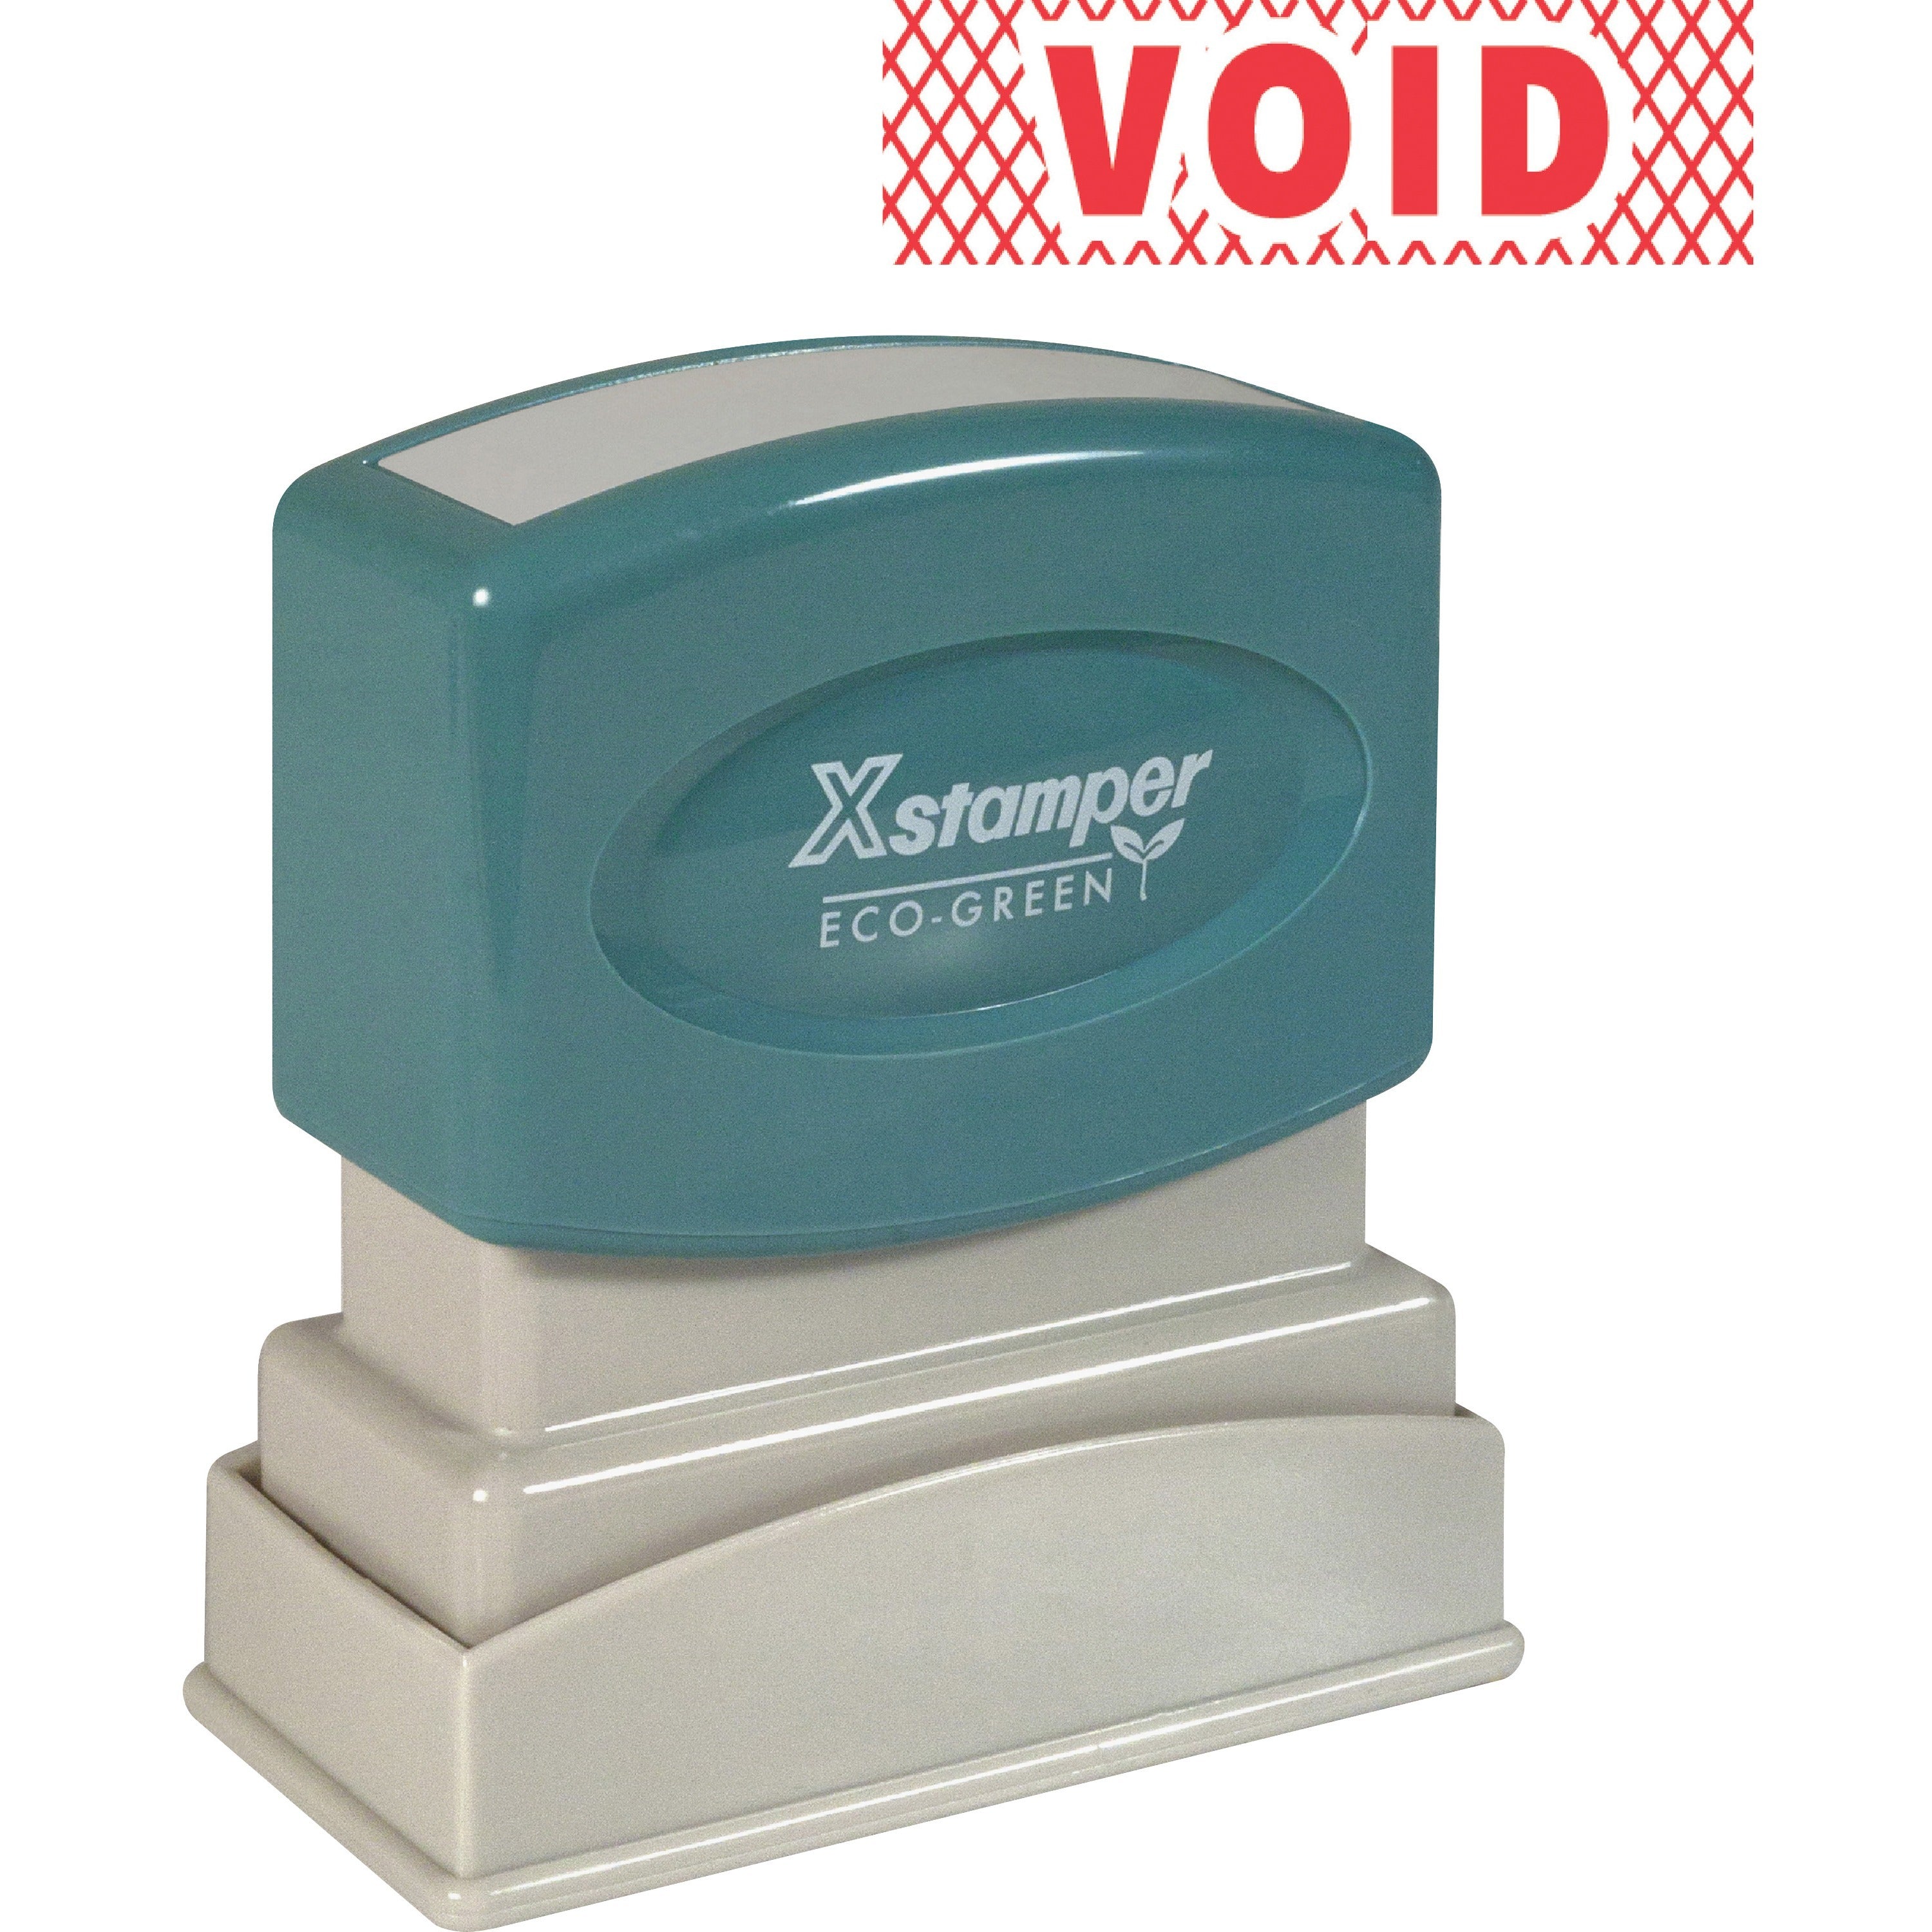 Xstamper Pre-Inked VOID One Color Title Stamp - Message Stamp - "VOID" - 0.50" Impression Width x 1.63" Impression Length - 100000 Impression(s) - Red - Recycled - 1 Each - 